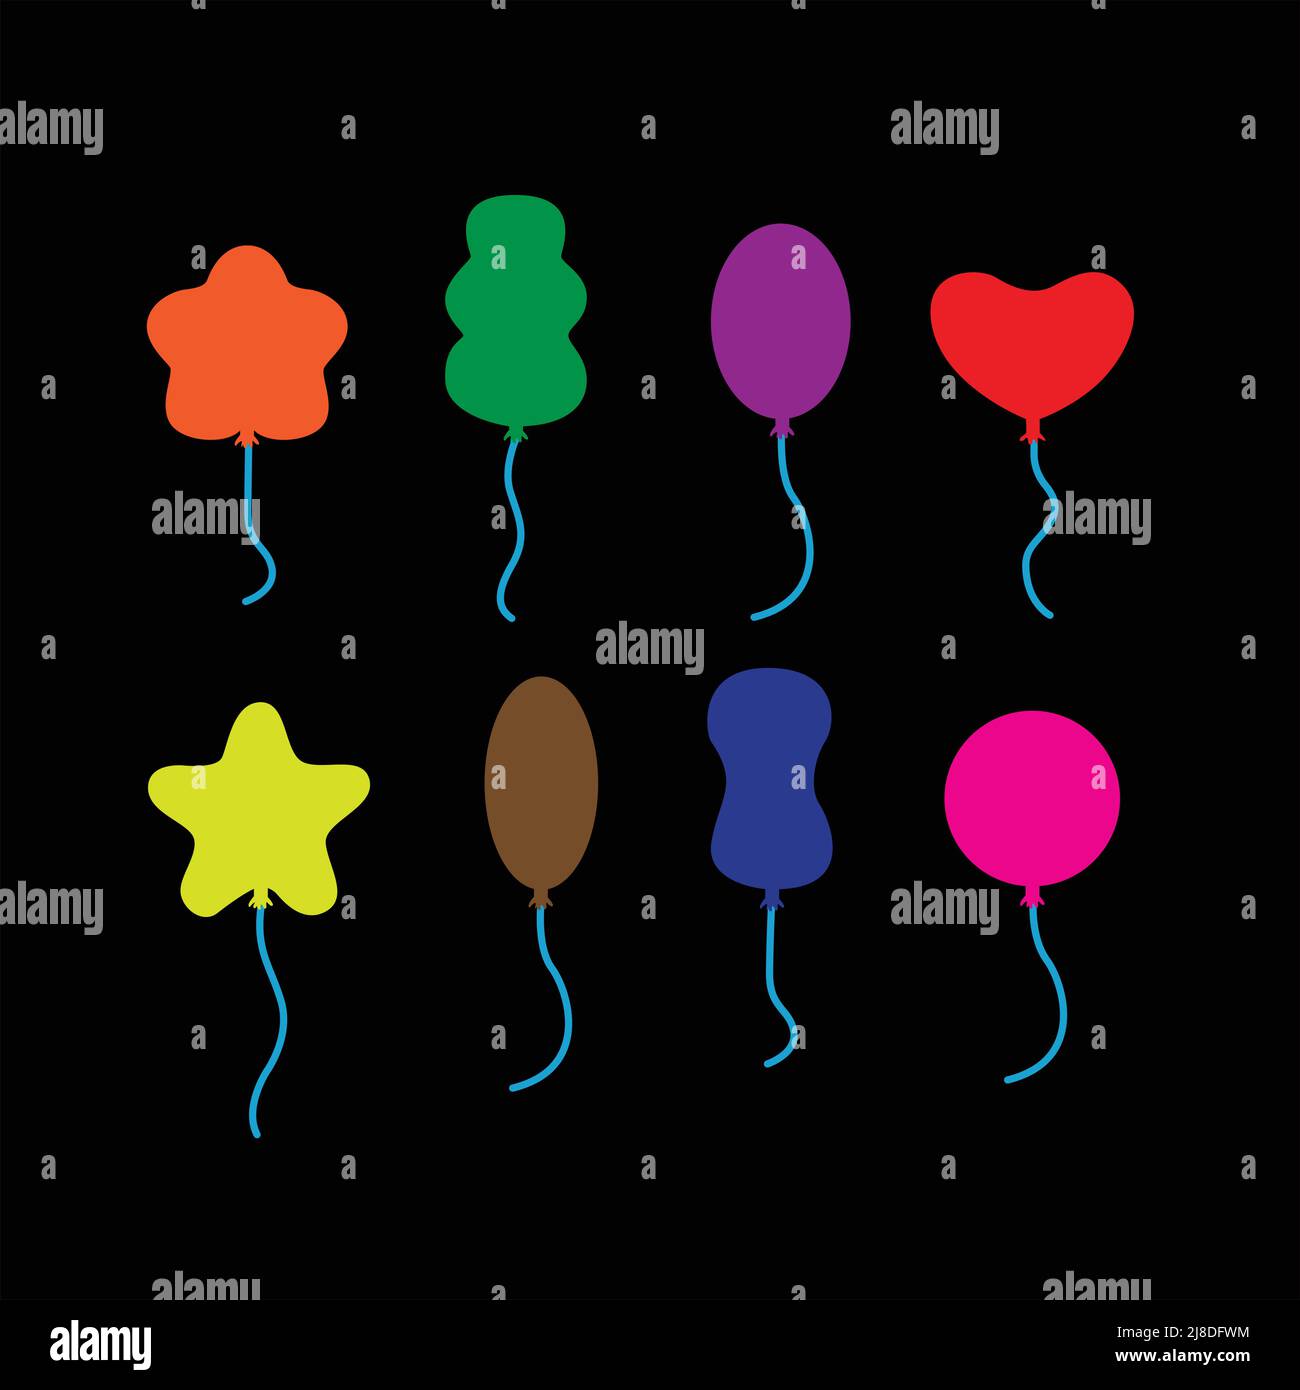 different shape and color balloons. on black background Stock Vector